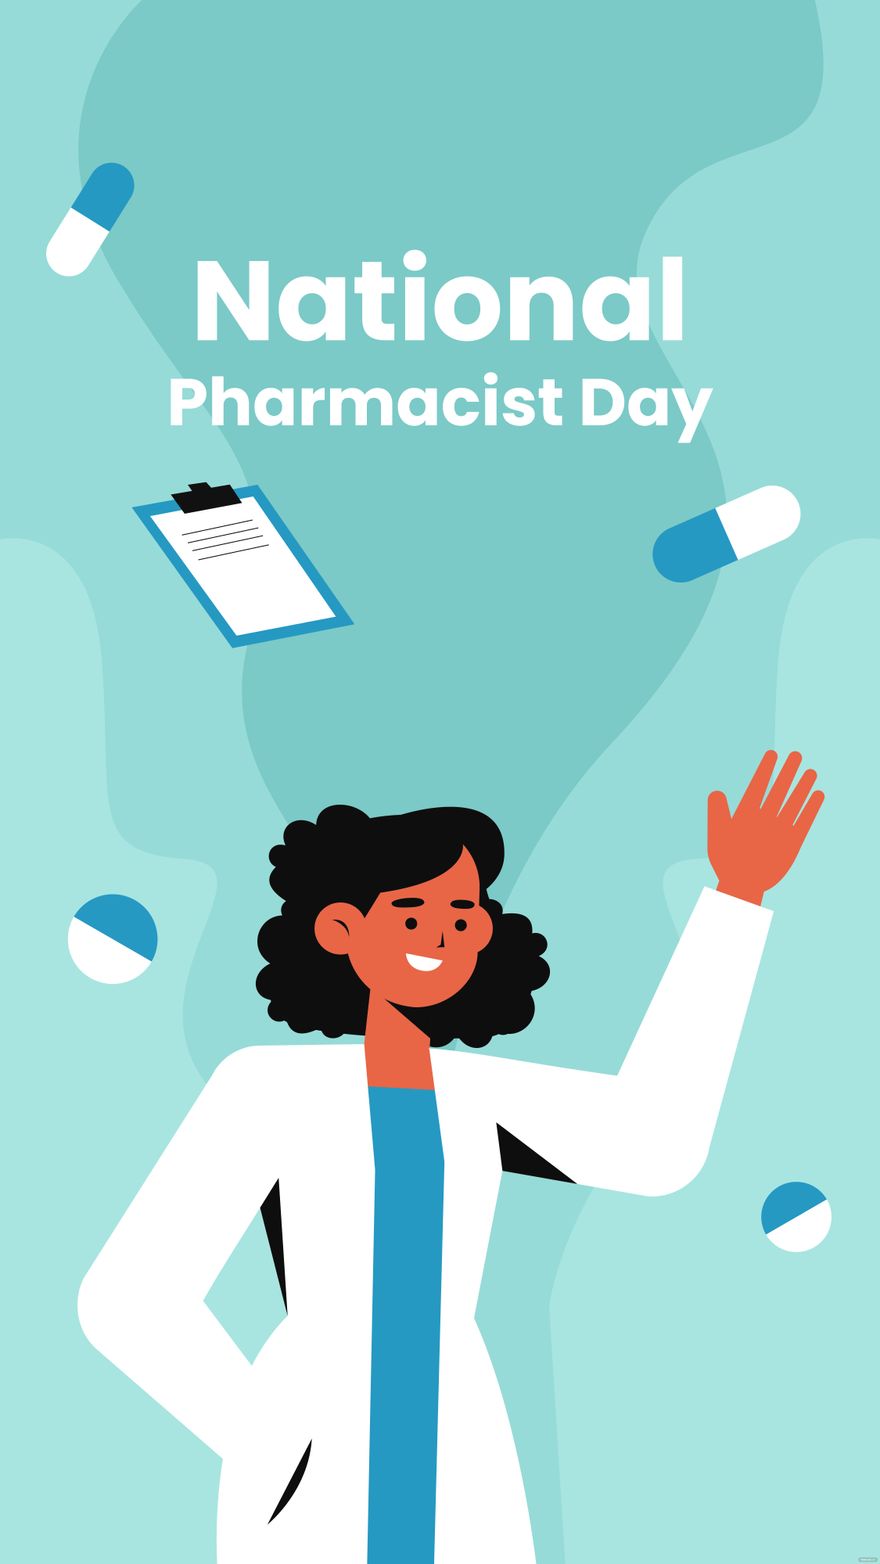 Free National Pharmacist Day iPhone Background in PDF, Illustrator, PSD, EPS, SVG, JPG, PNG